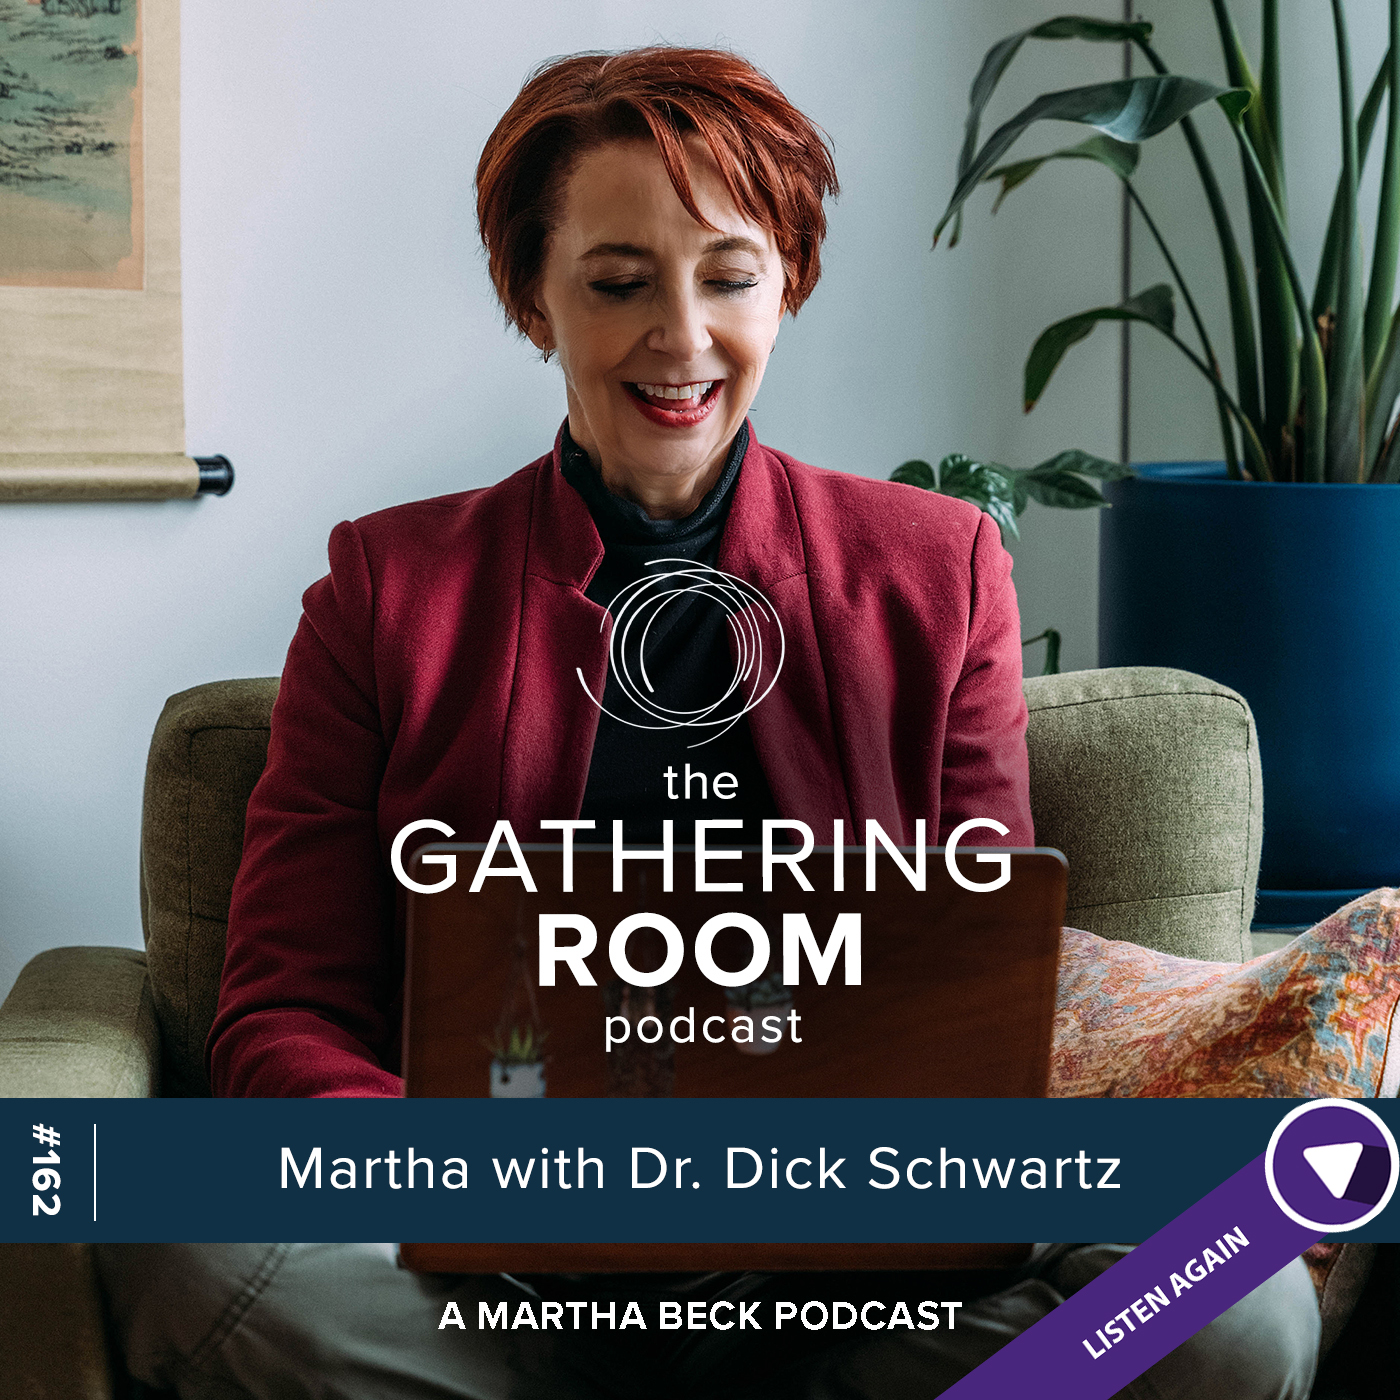 Image for The Gathering Pod A Martha Beck Podcast Episode #162 Listen Again: Martha with Dr. Dick Schwartz